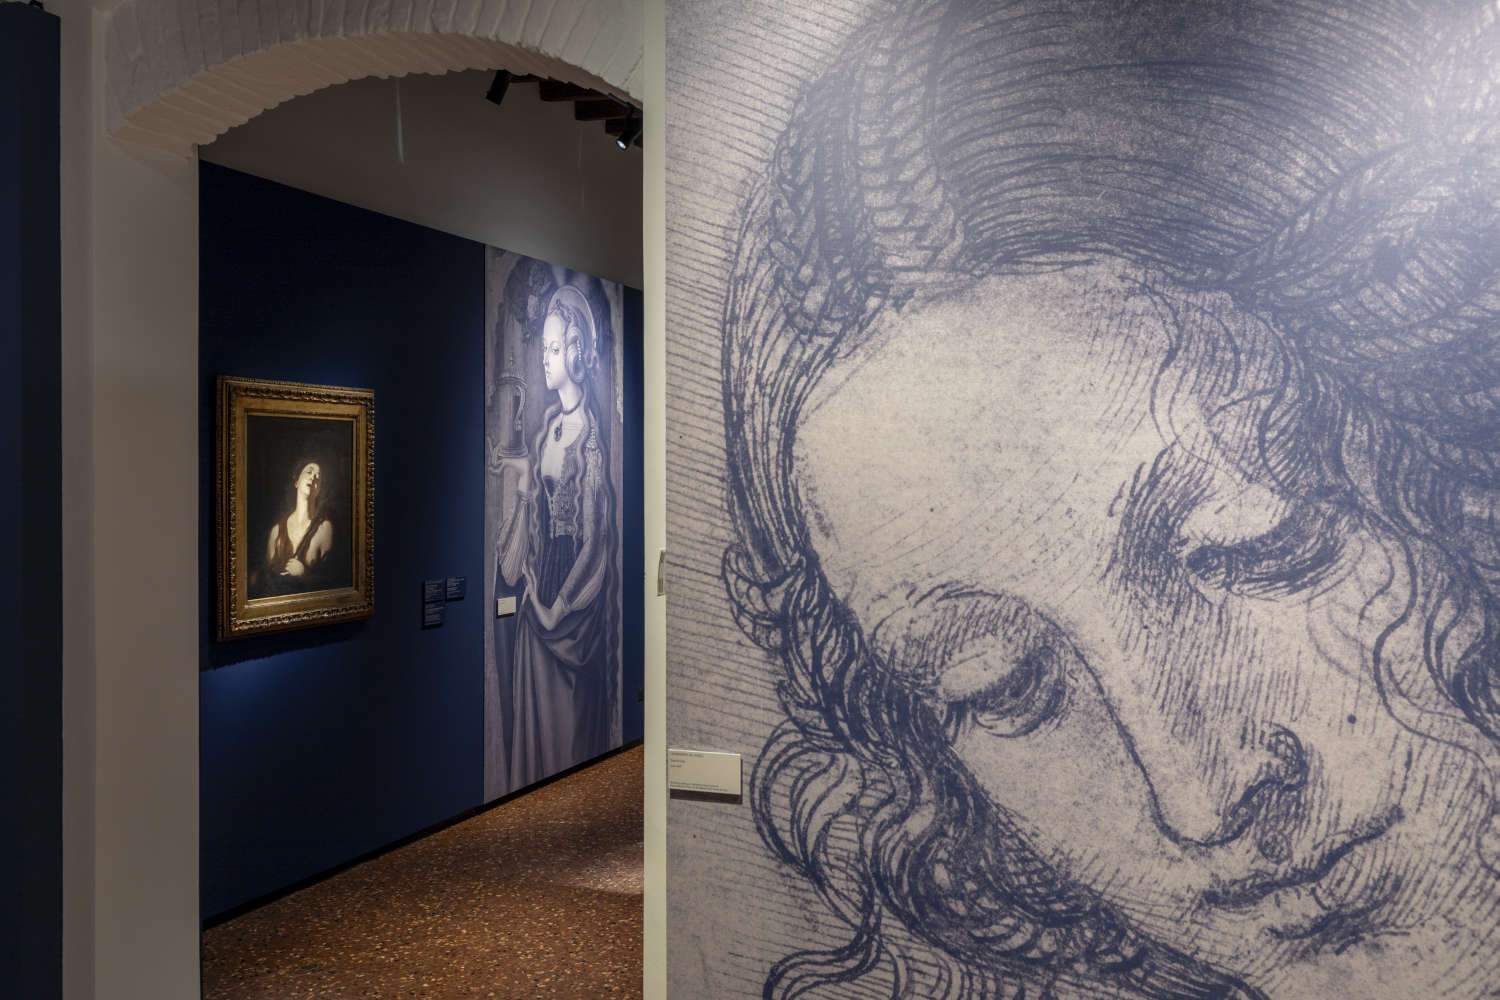 An exhibition in Vicenza explores women's hairstyles of the Renaissance